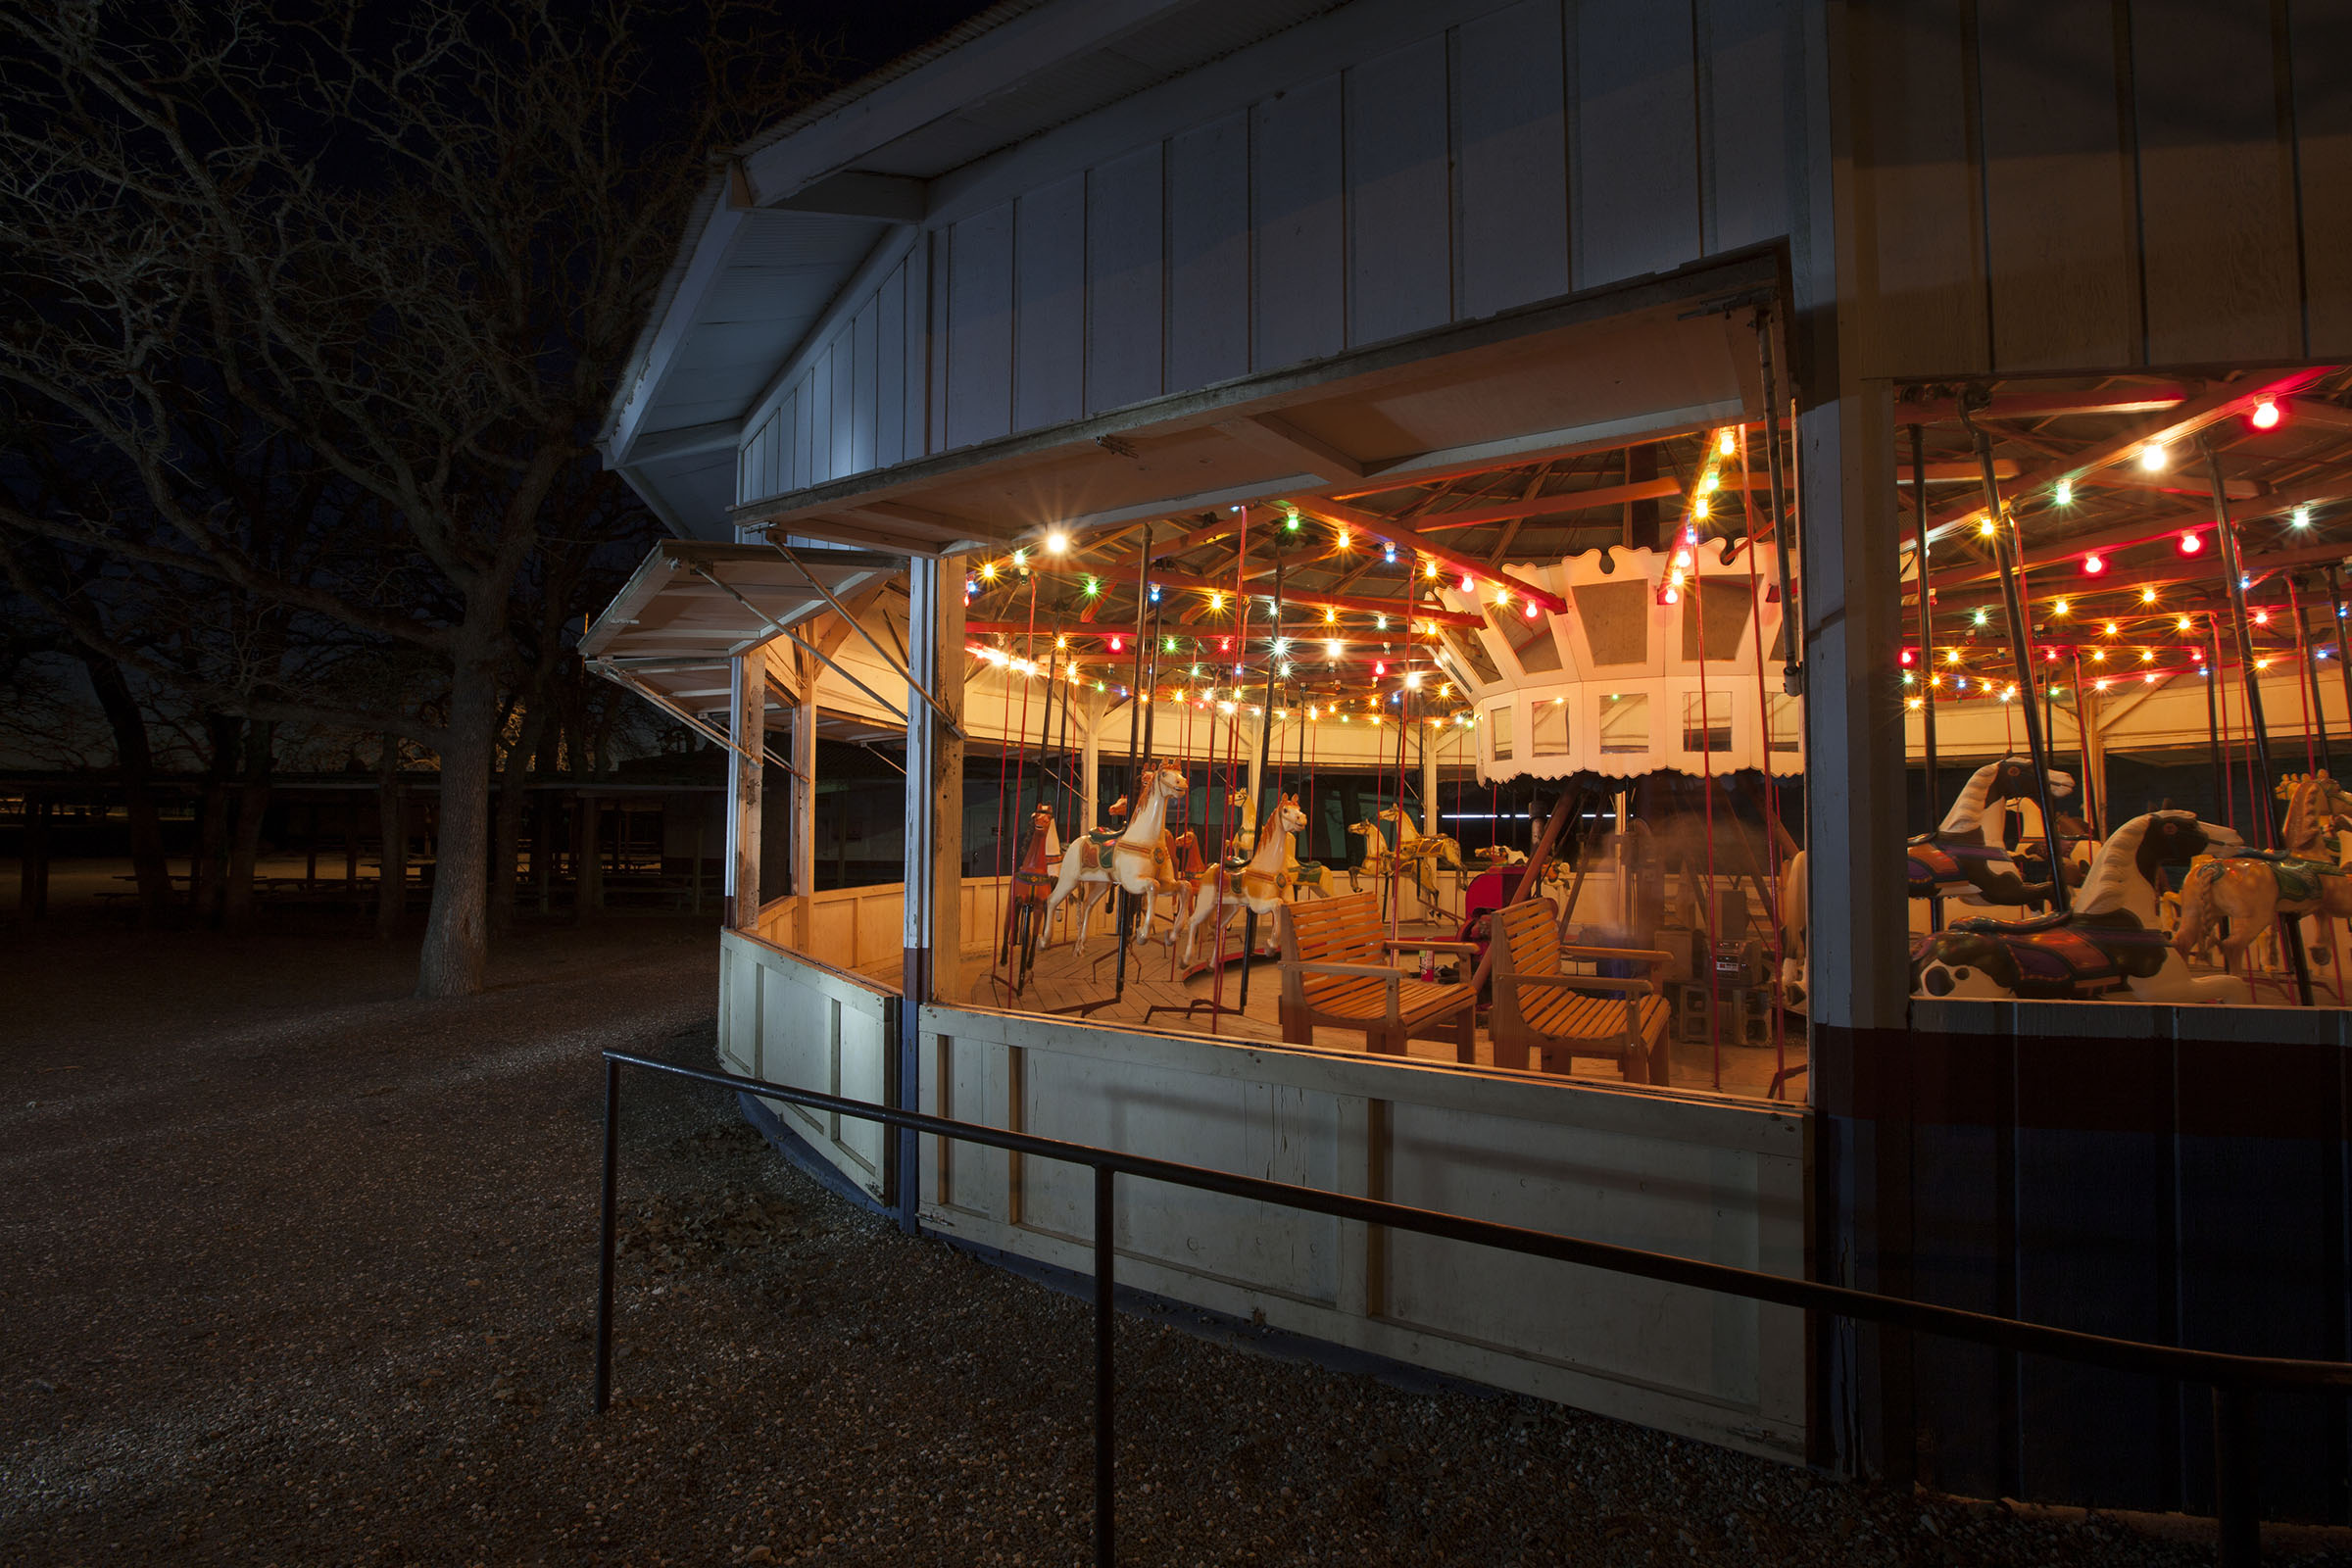 The exterior of a wooden carousel with bright colorful lights inside